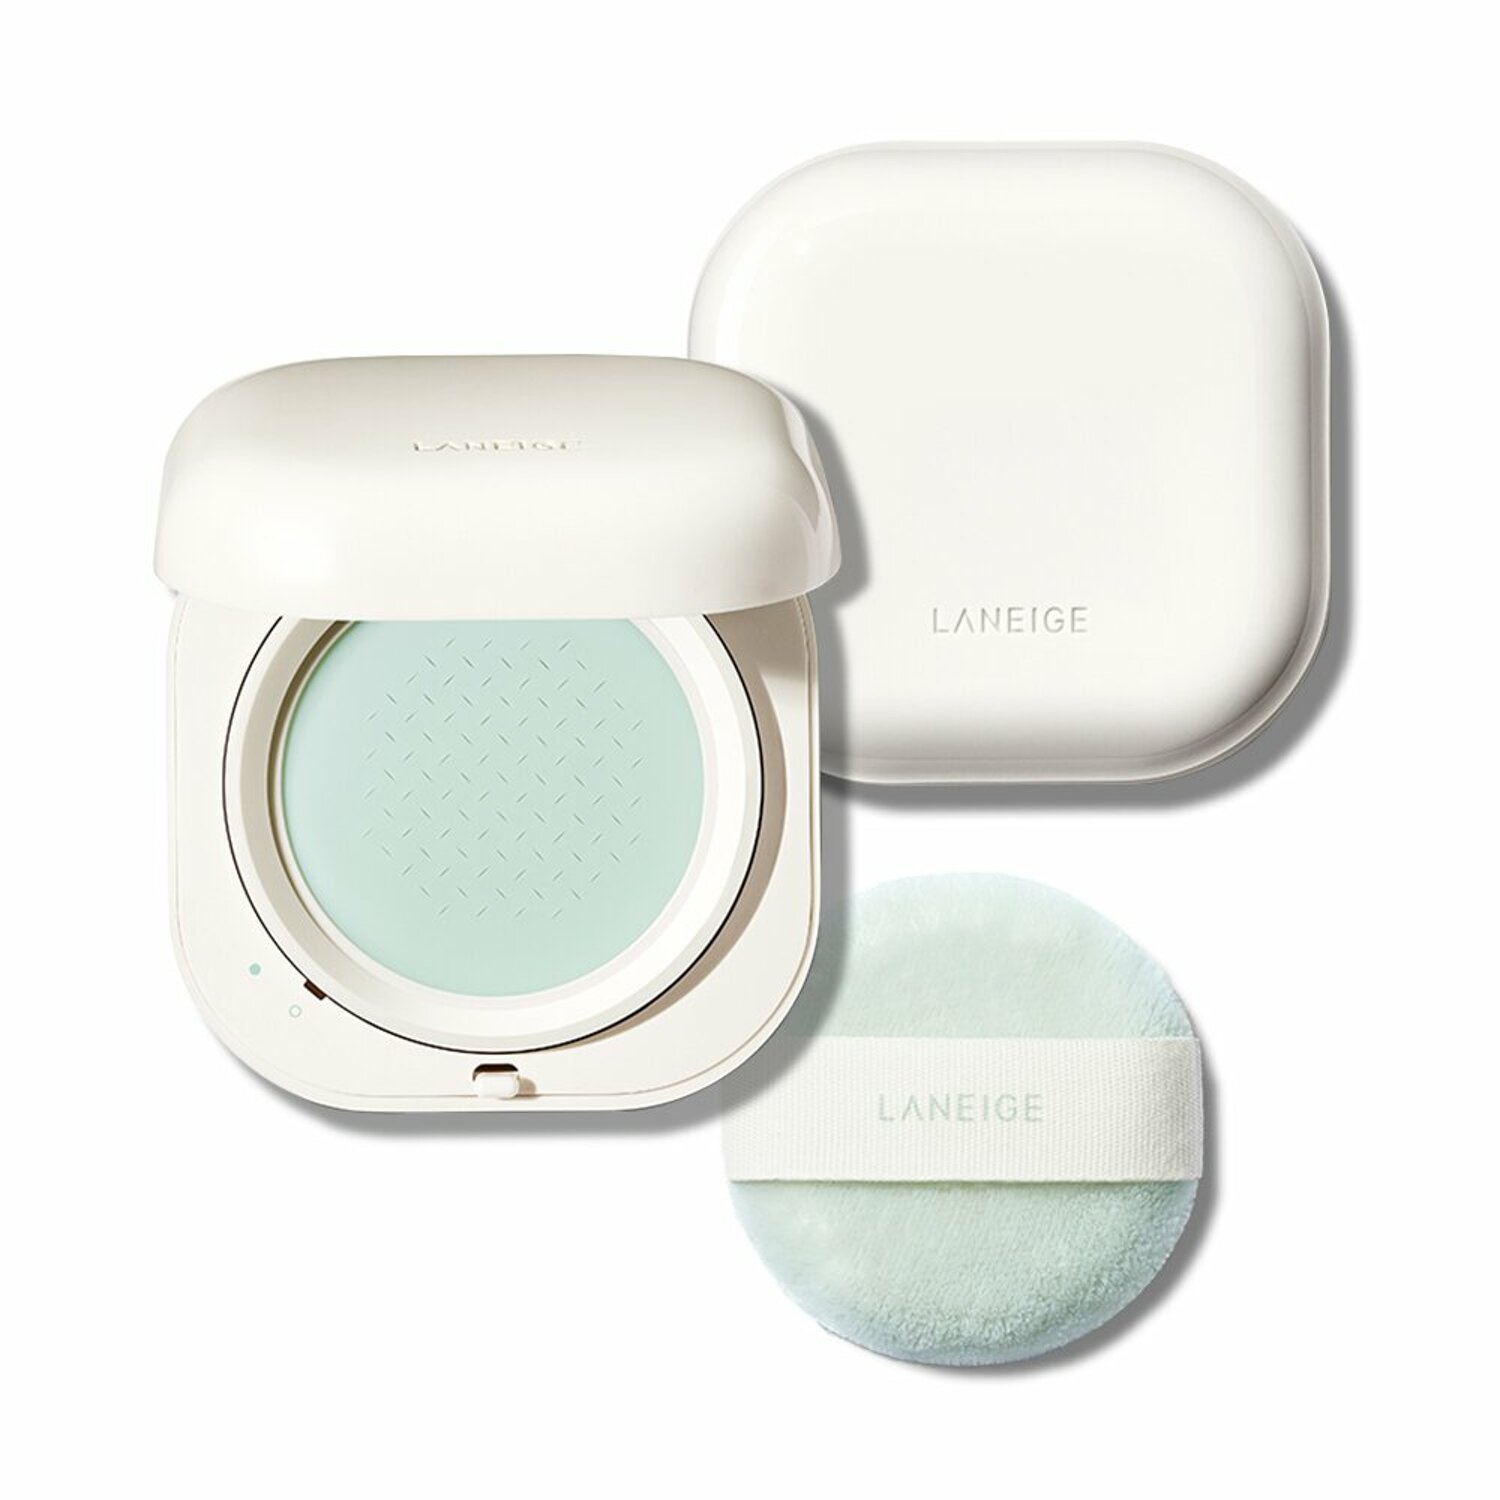 [NEW] LANEIGE Neo Essential Blurring Finish Powder 7g  | OLIVE YOUNG Global